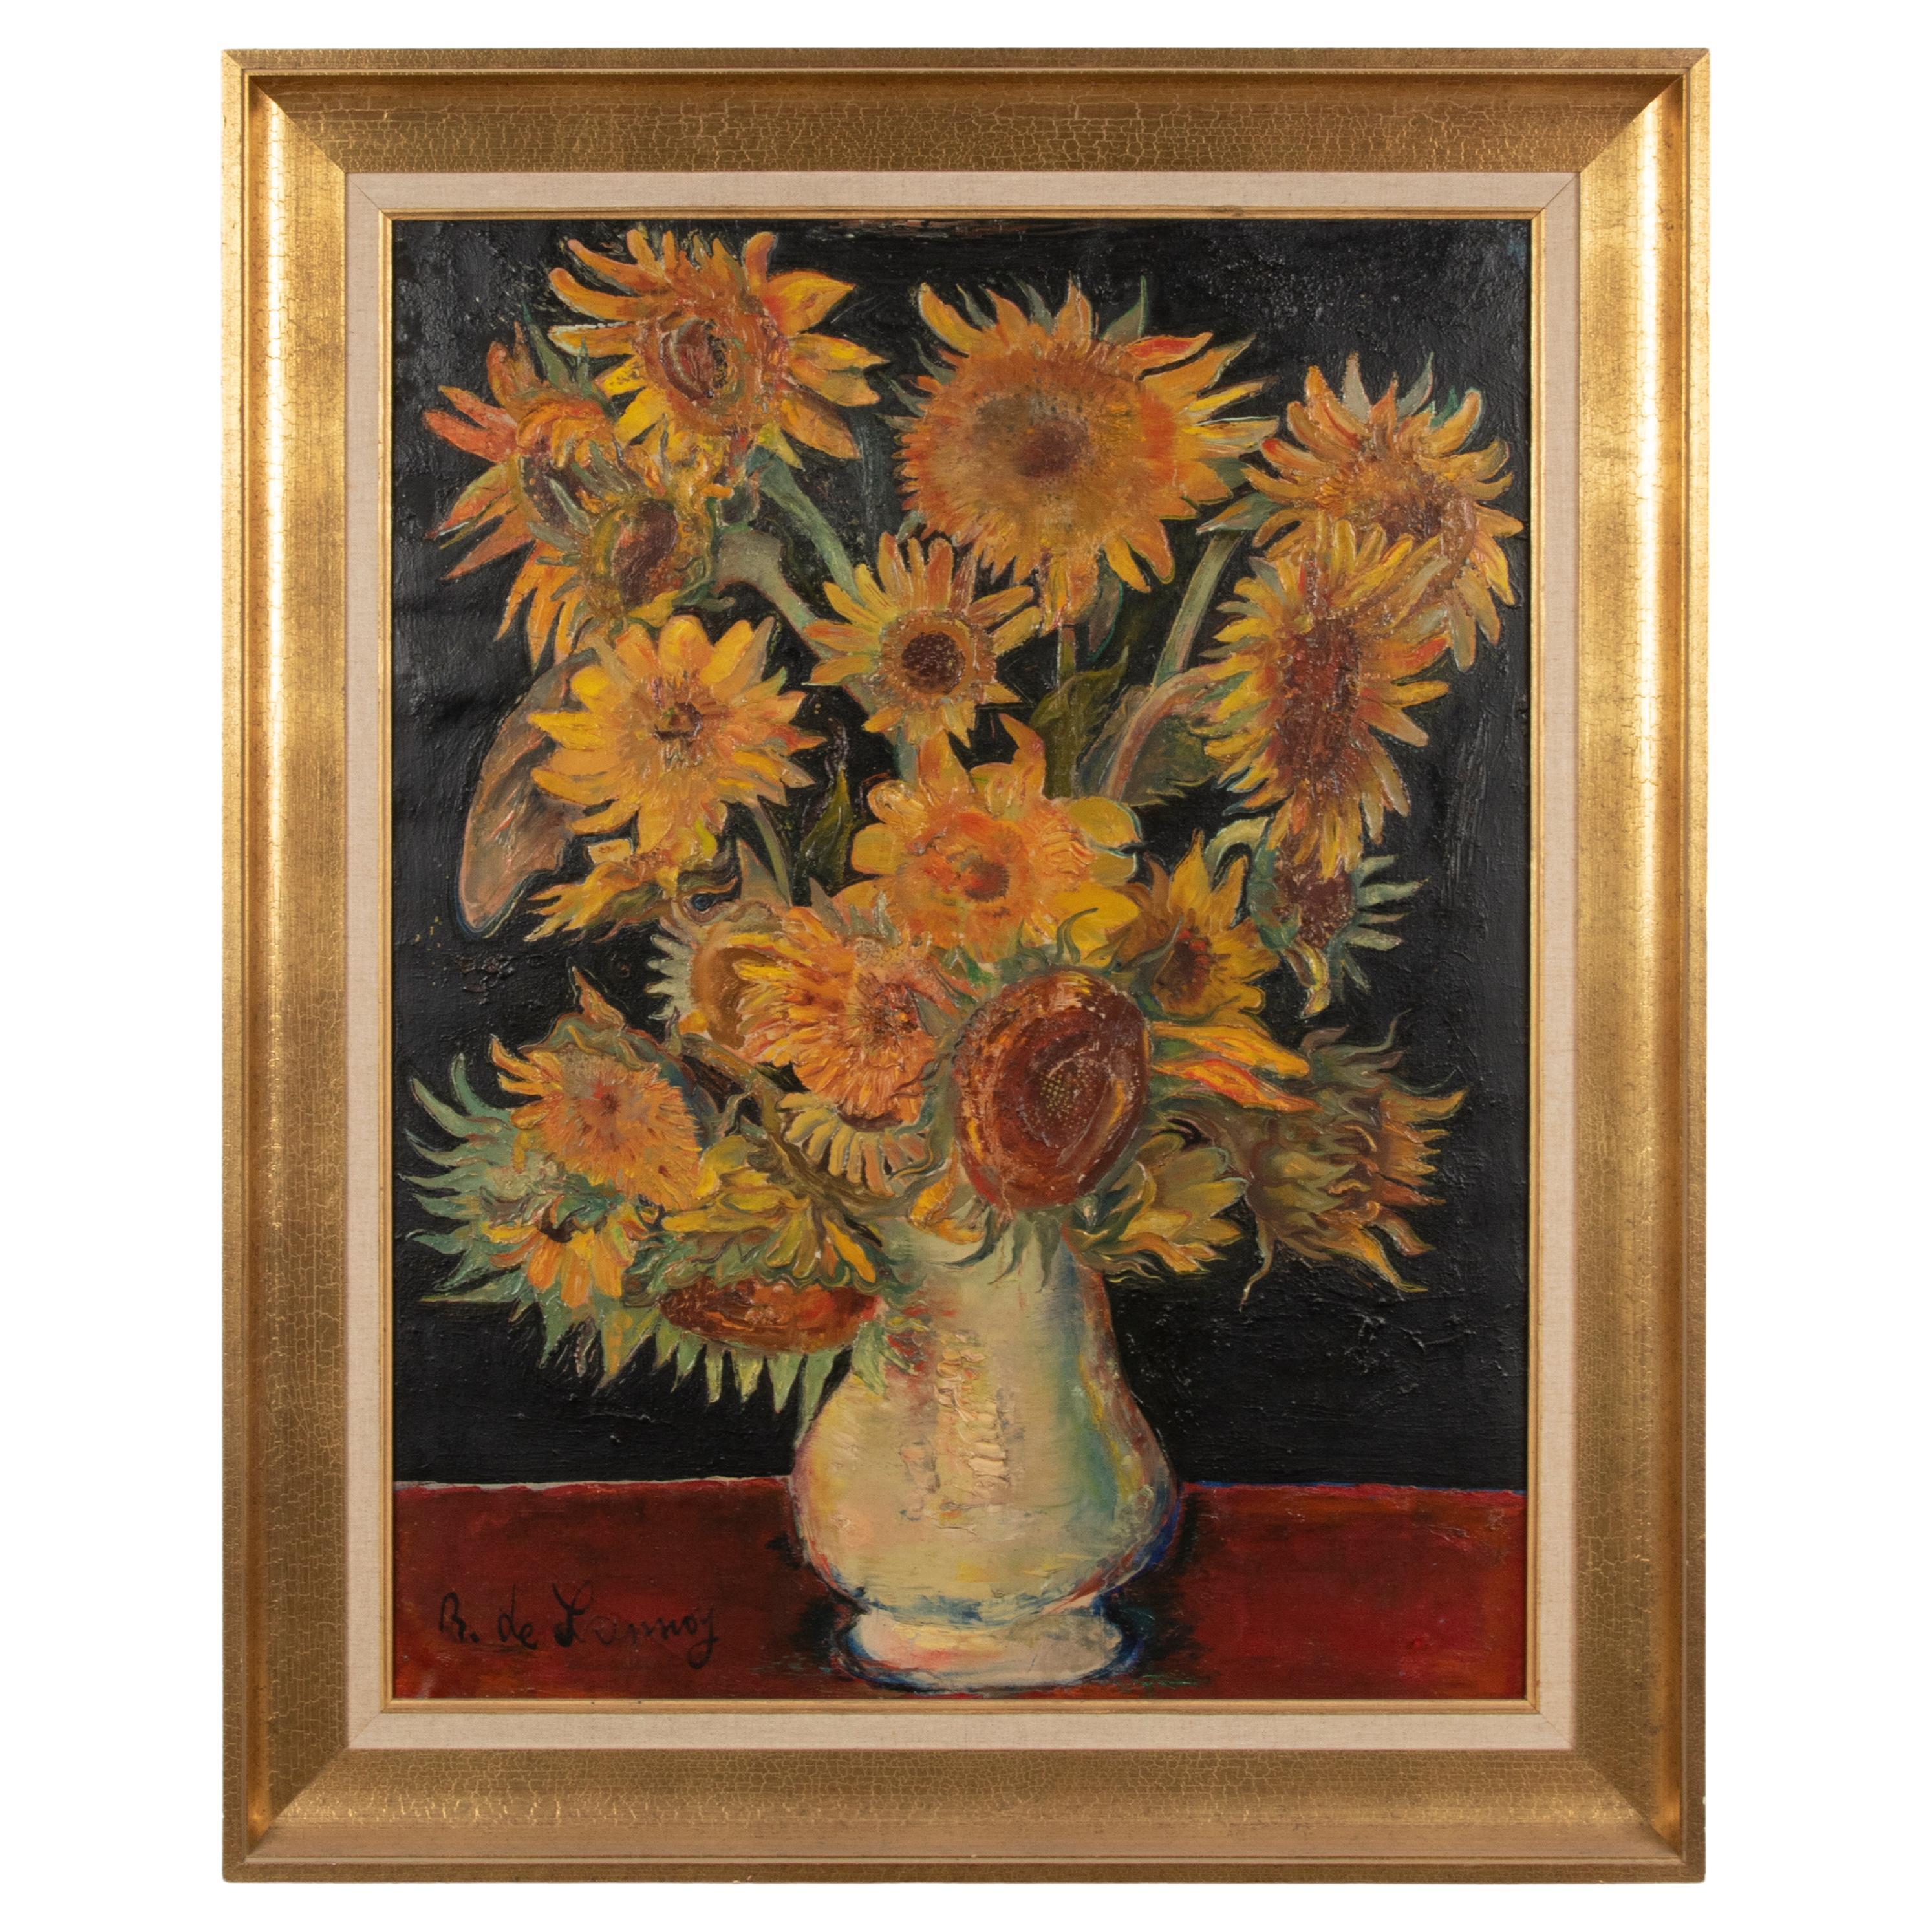 Mid-20th Century, Oil Painting Flower Still Life with Sunflowers in a Vase For Sale